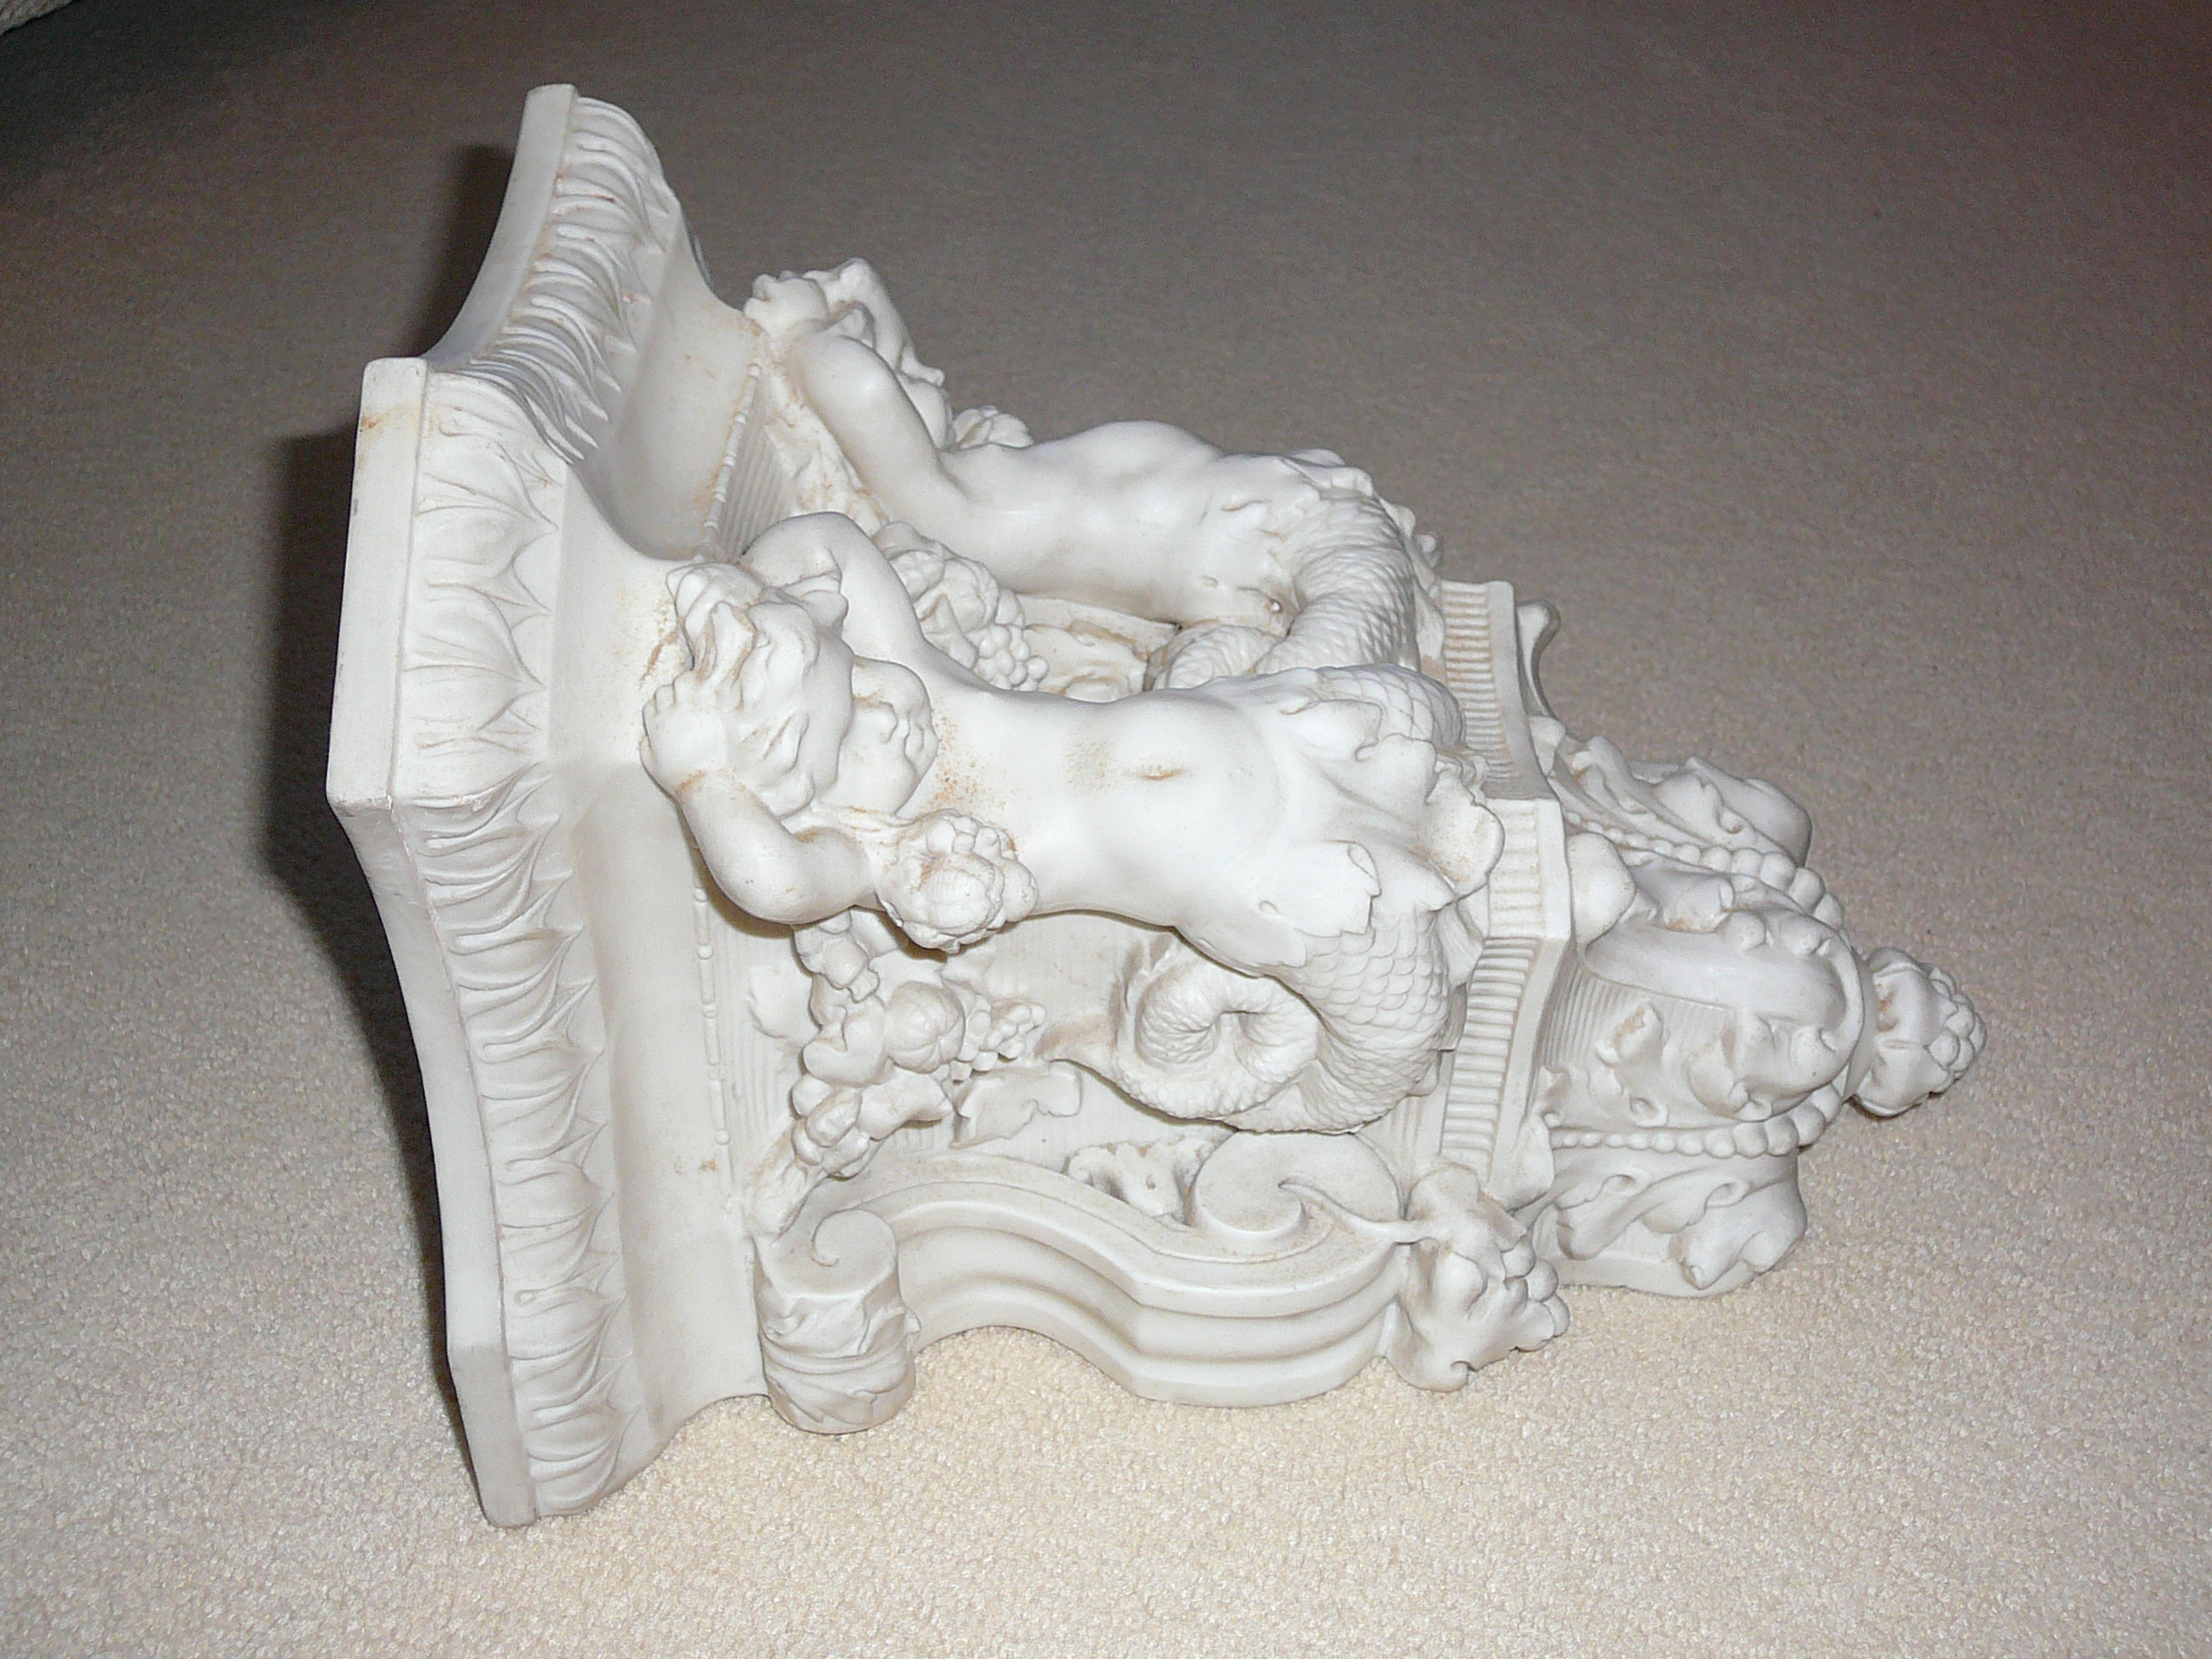 Copeland Parian decorative wall bracket with minor inobtrusive damage to one side. - Image 3 of 6